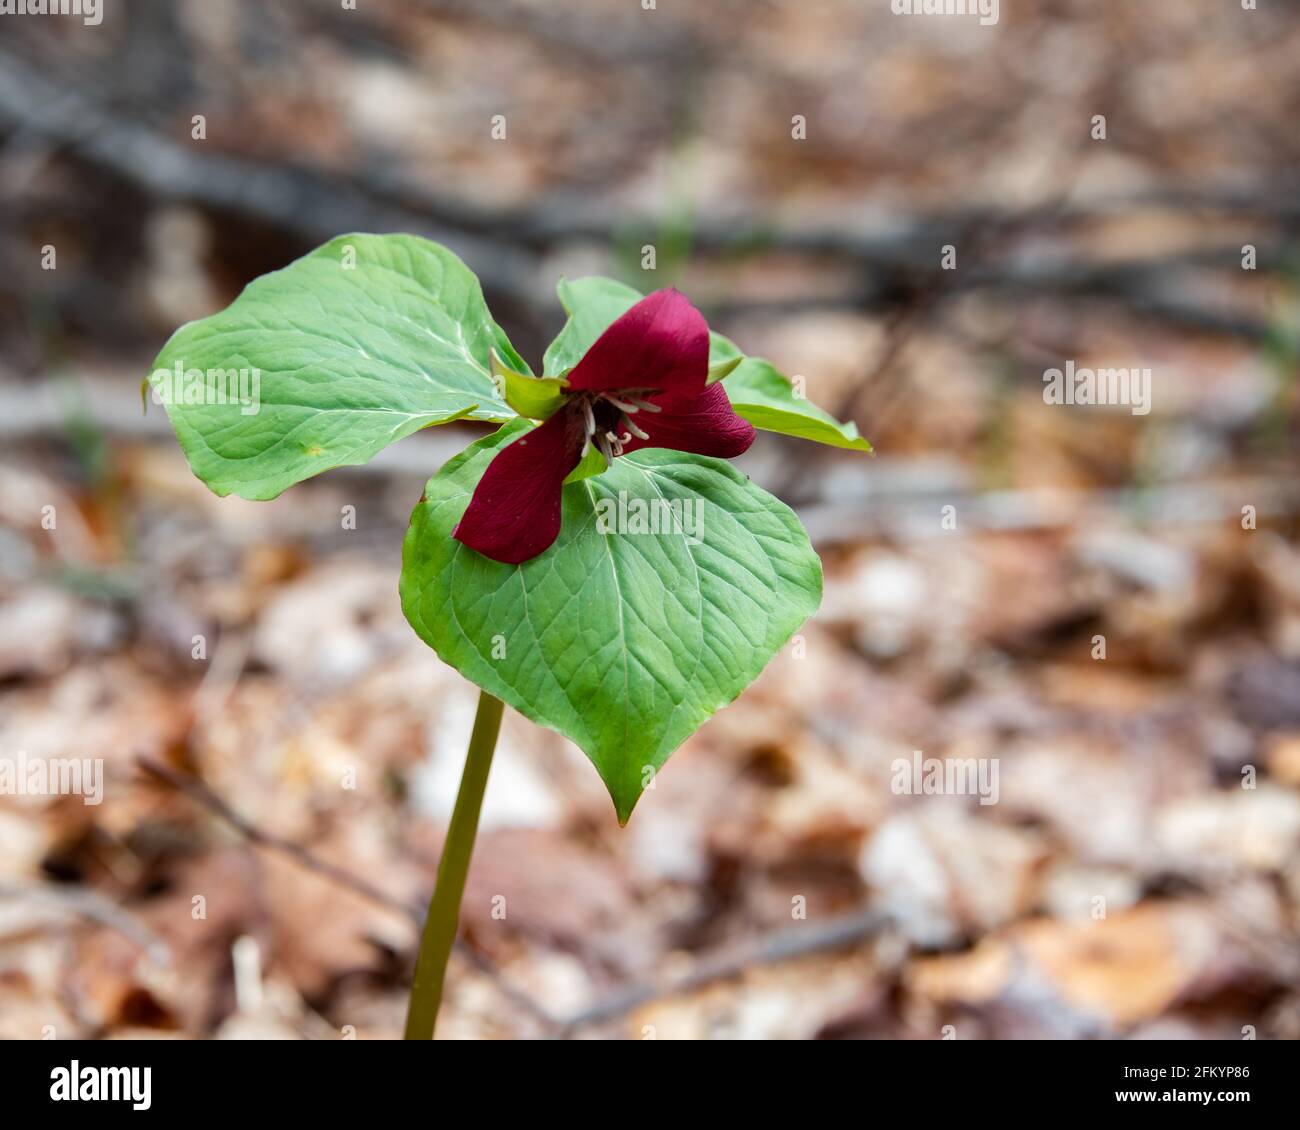 A single red trillium plant with flower, Trillium erectum, growing in the wild Adirondack Mountains, NY USA forest in early spring. Stock Photo